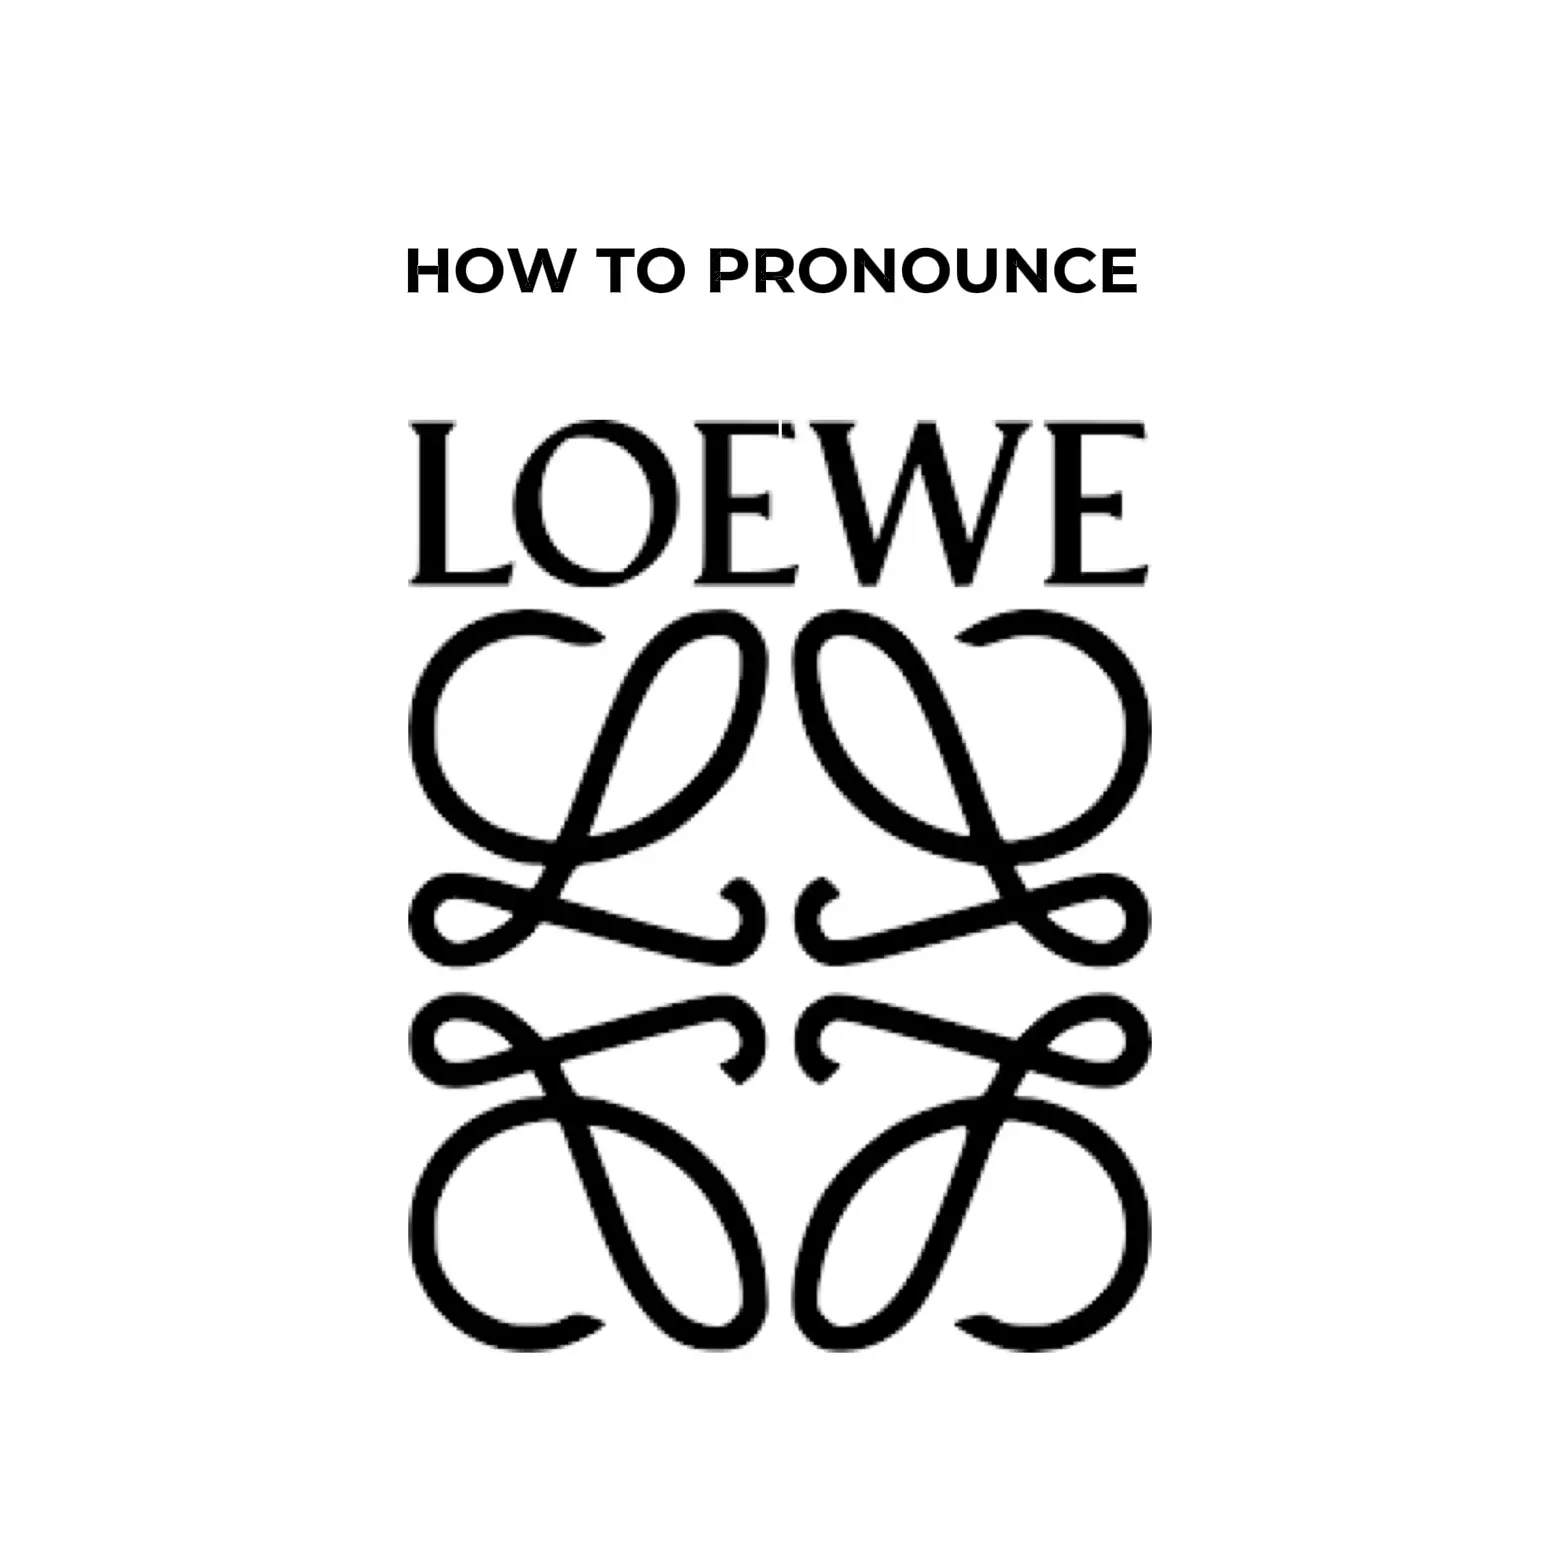 HOW TO PRONOUNCE #Loewe, Gallery posted by Alina